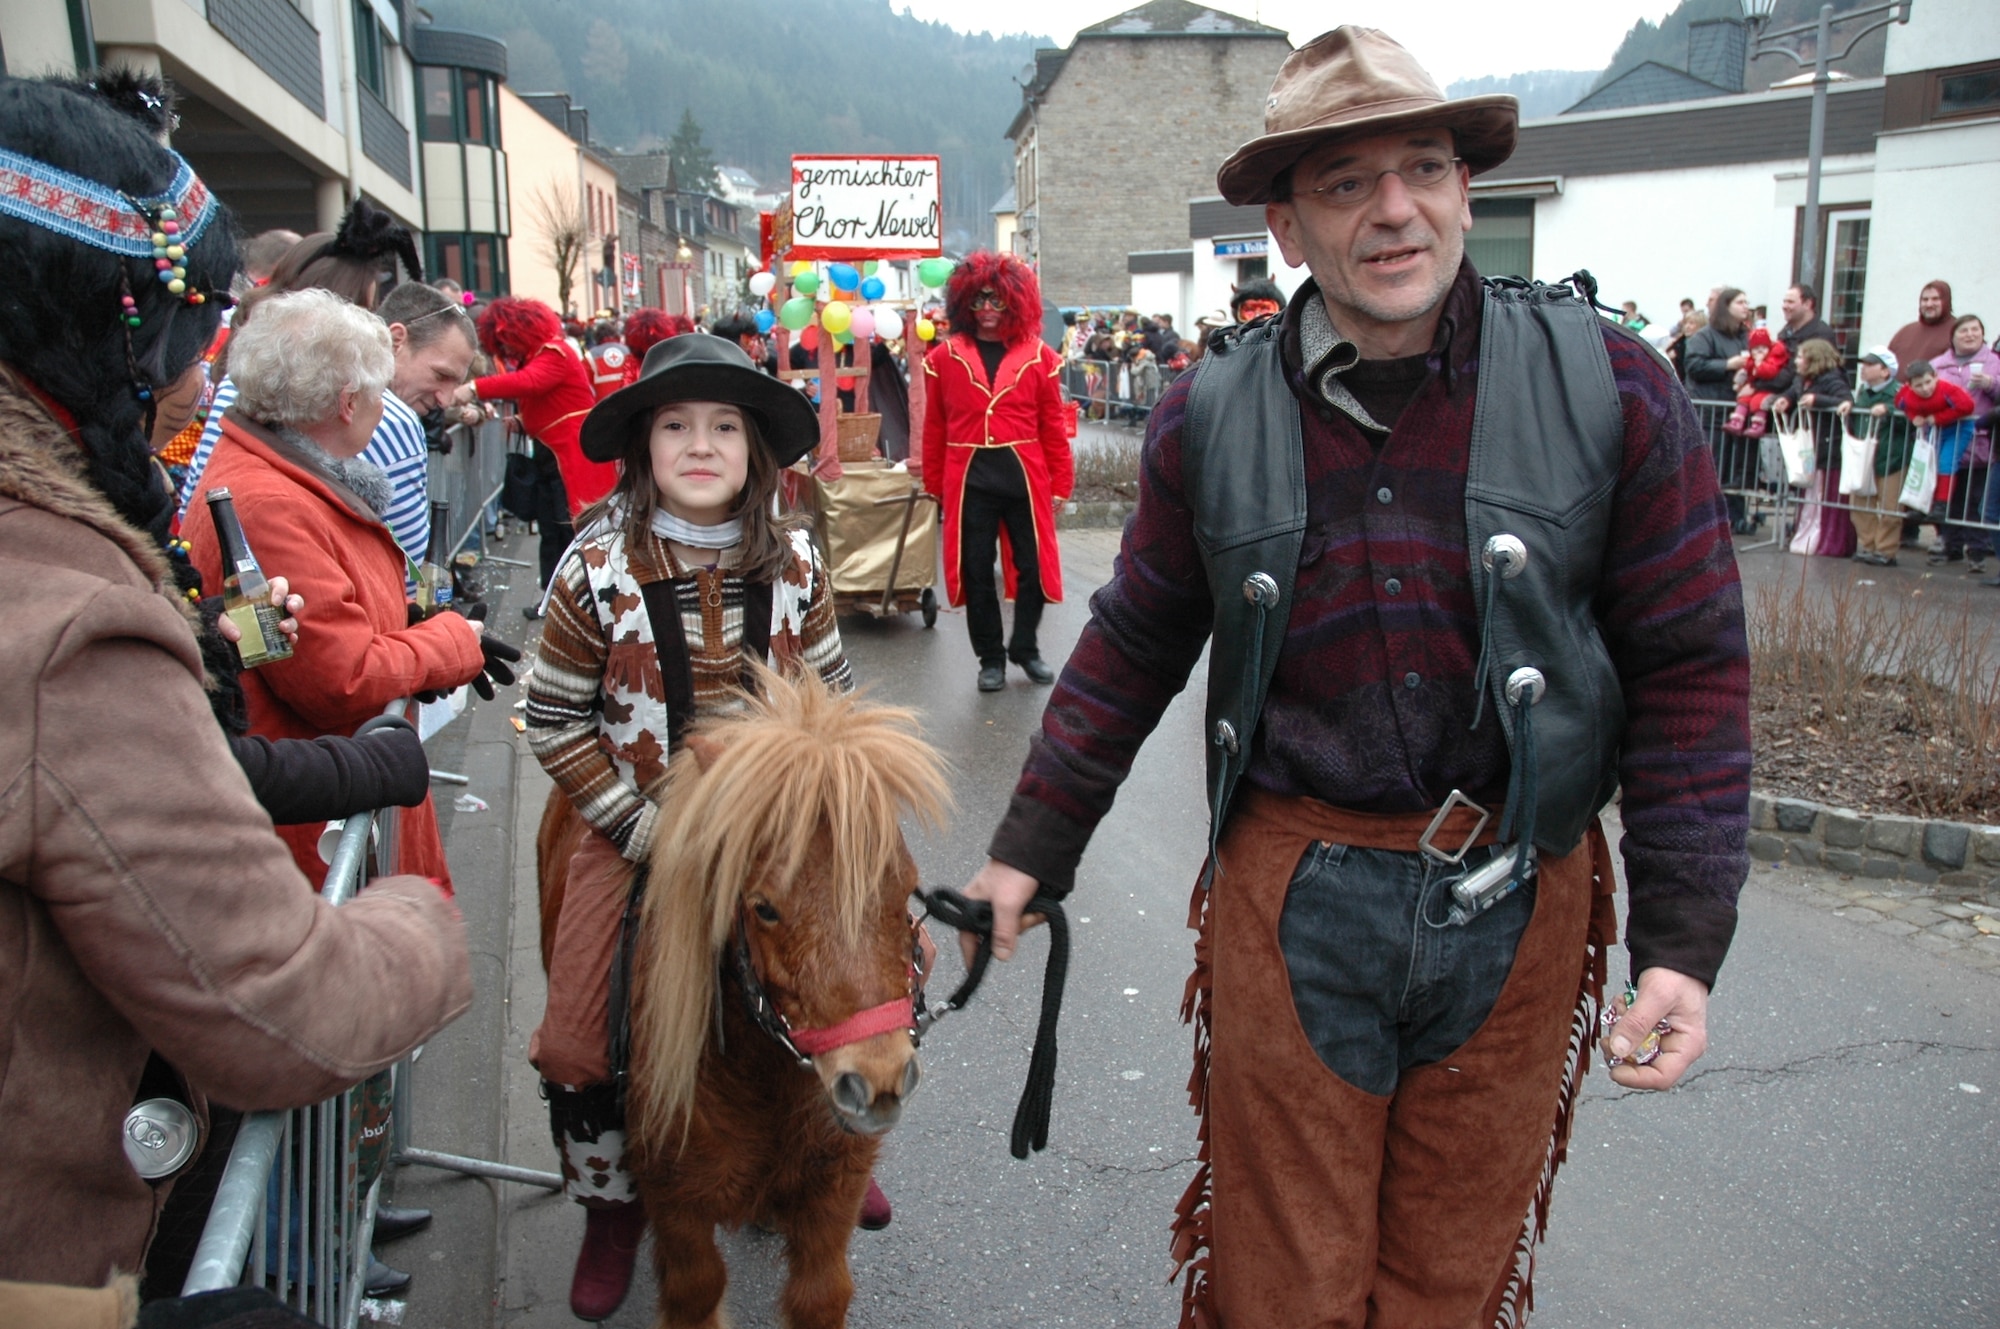 KORDEL, Germany – A cowboy and cowgirl enjoyed a walk passing by the crowd at the Kordel fashing parade Feb. 22, 2009. Parade observers stand in the streets, cheering, singing and dancing. (U.S. Air Force photo by Iris Reiff)